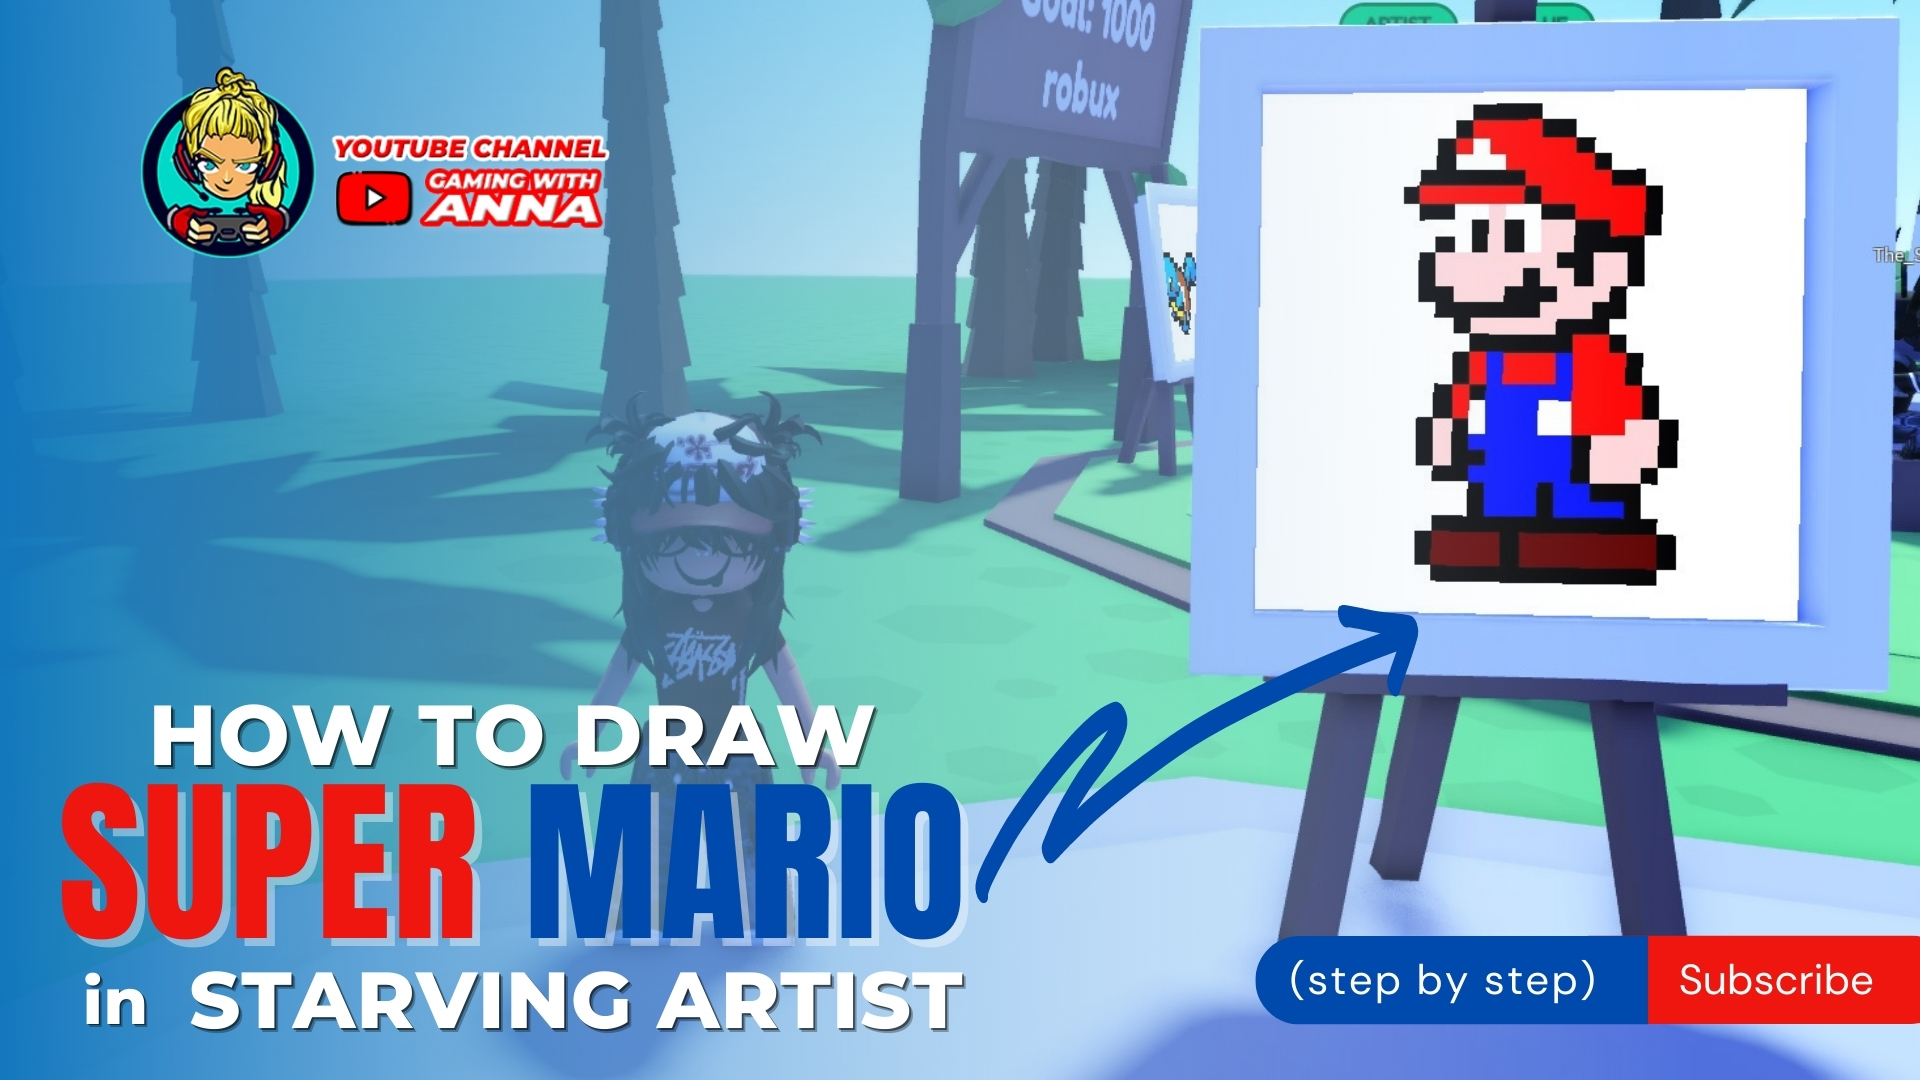 Starving Artist Drawing Tutorial What's An Nft? And Why Are People